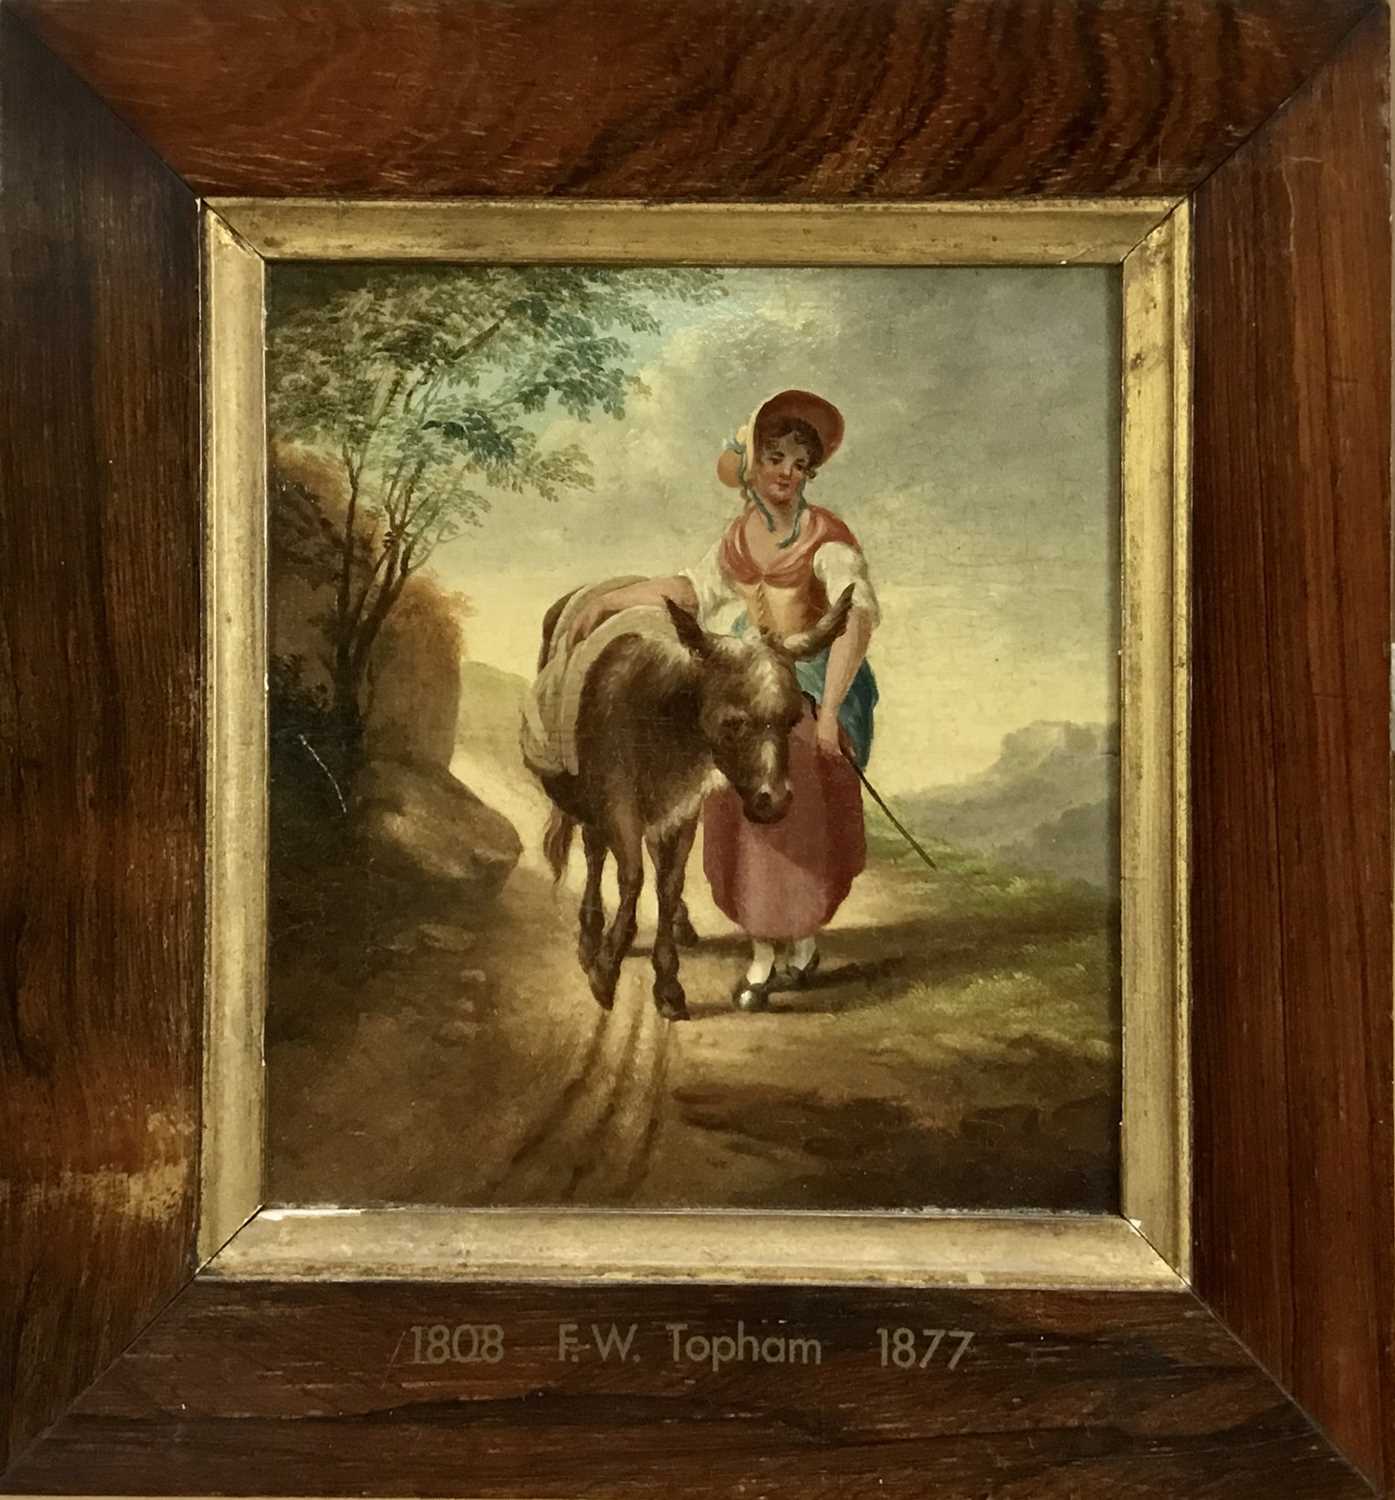 Lot 150 - Francis William Topham (1808-1877), oil on panel, A young peasant girl and her donkey on a hilly track, in rosewood frame, 16.5 x 15.4cm